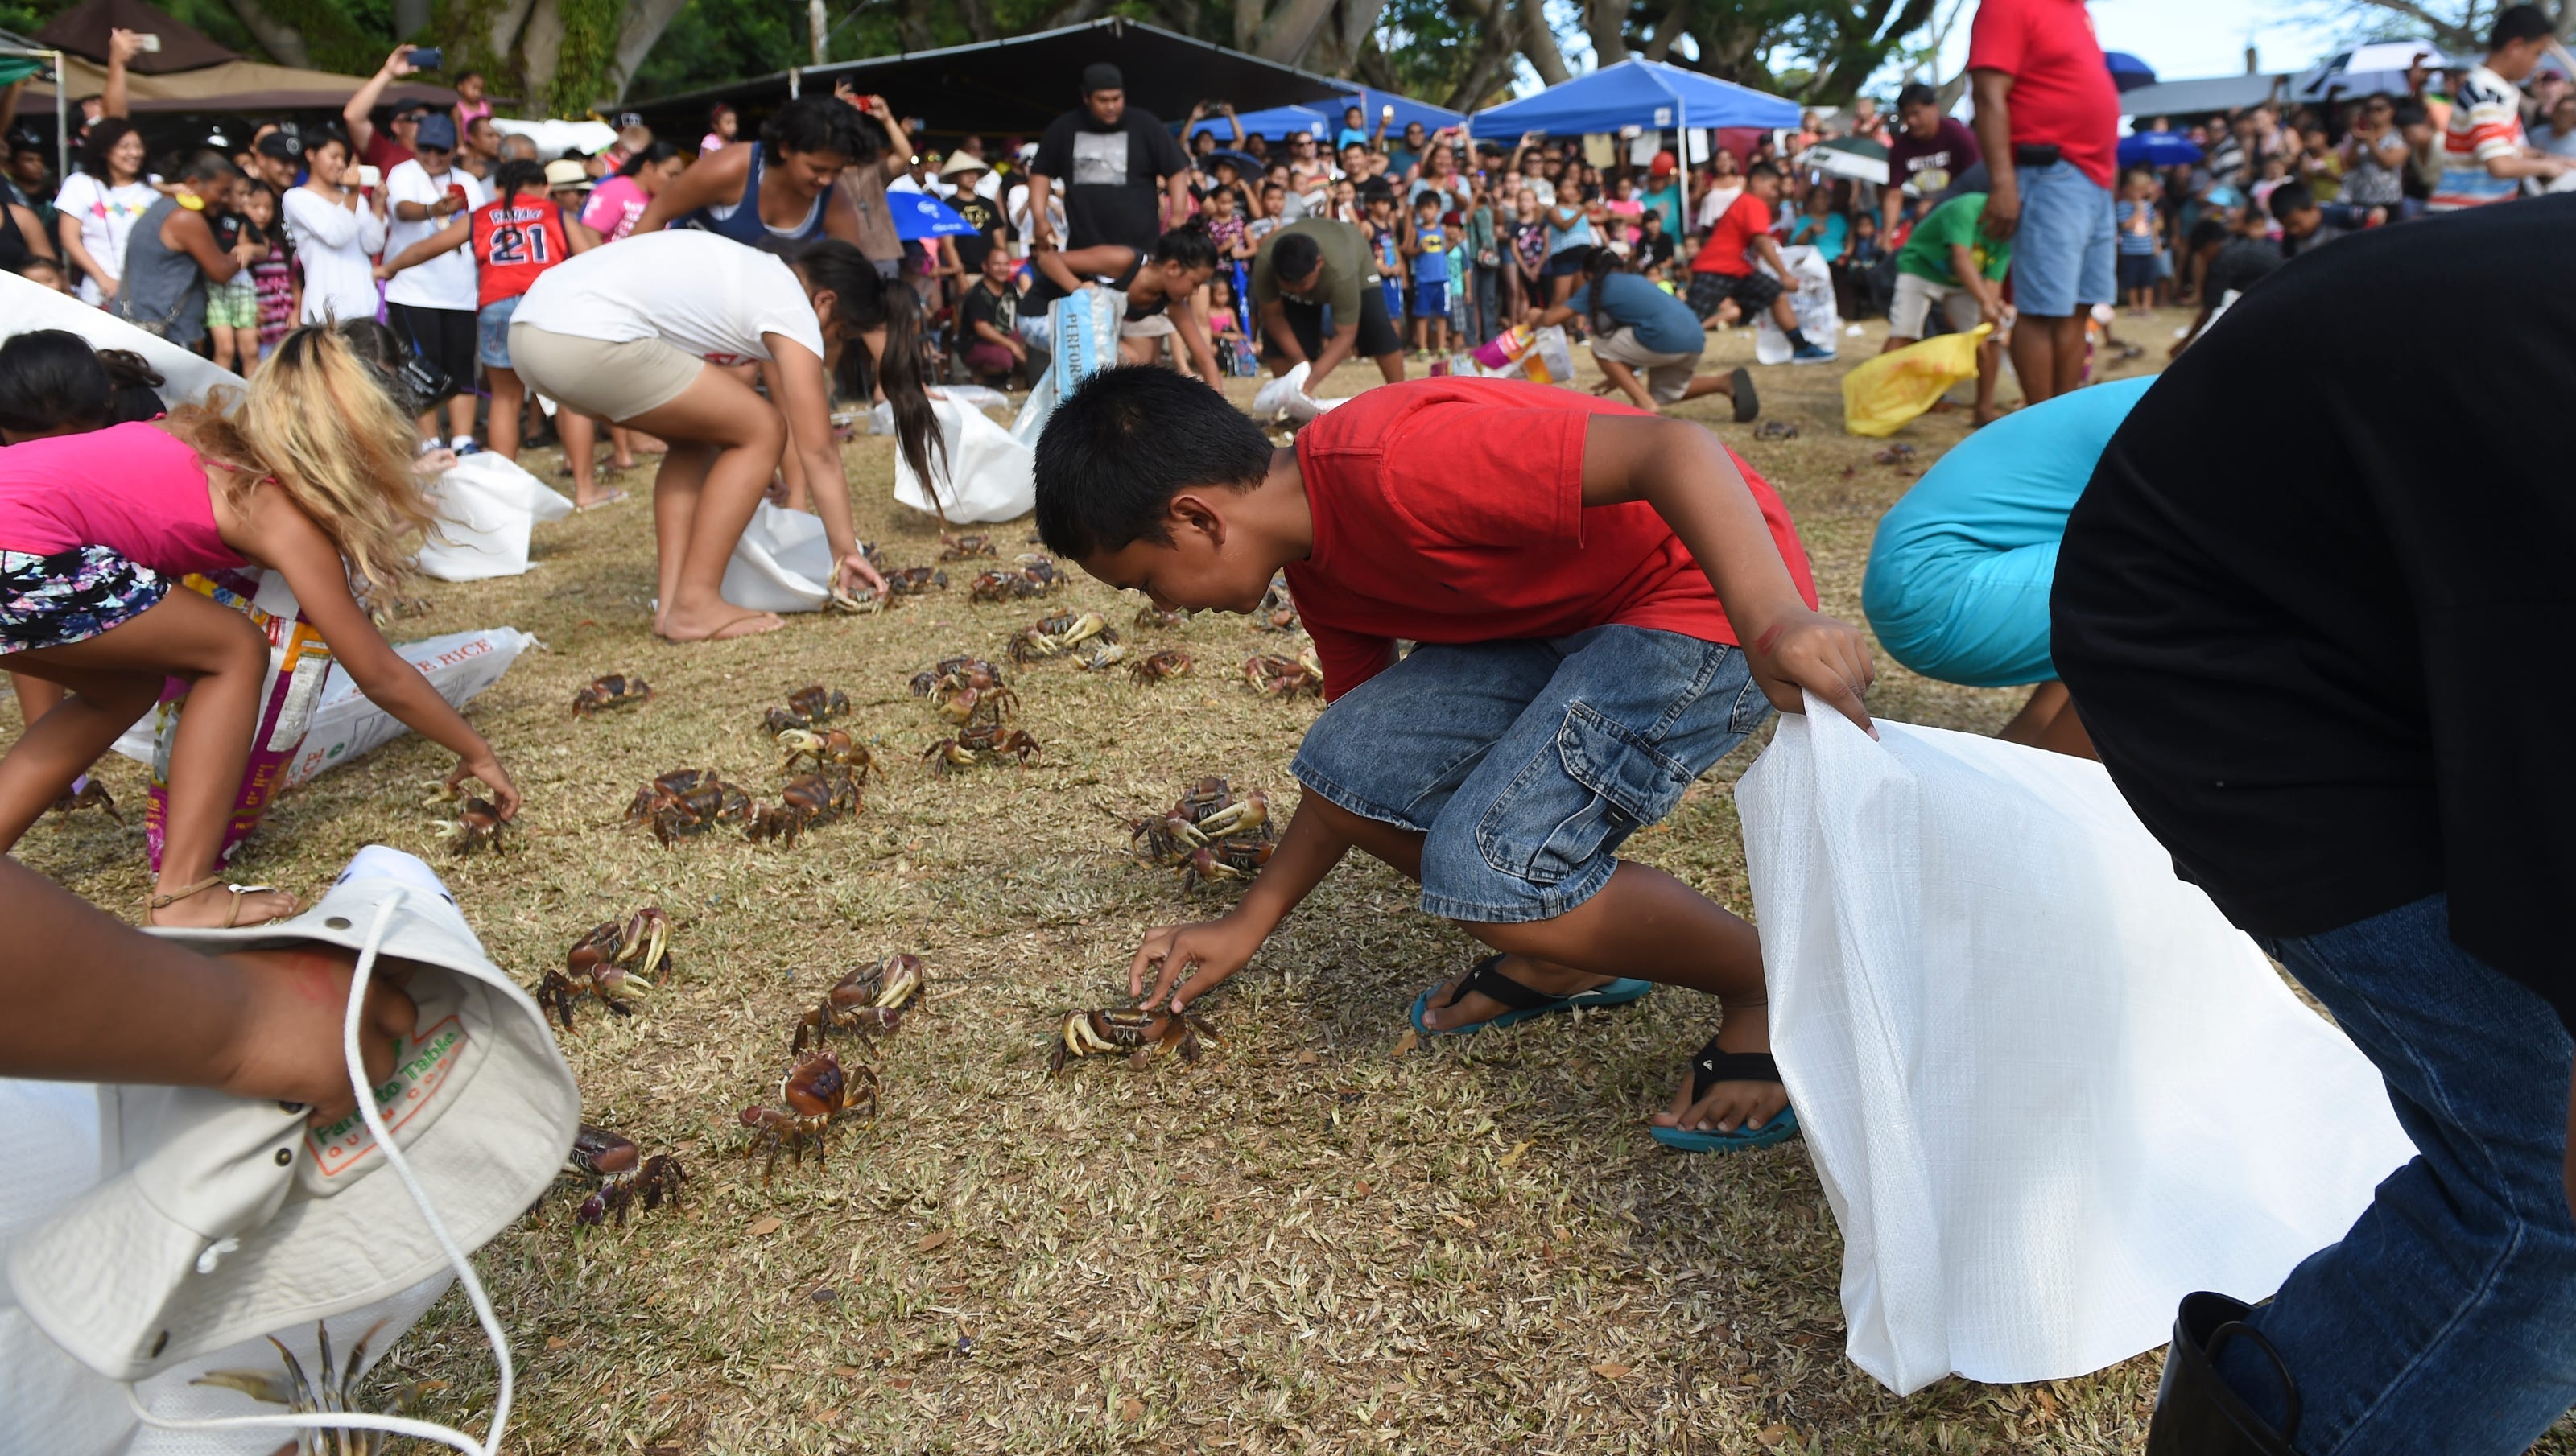 Catch and eat crab at the Malesso Crab Festival